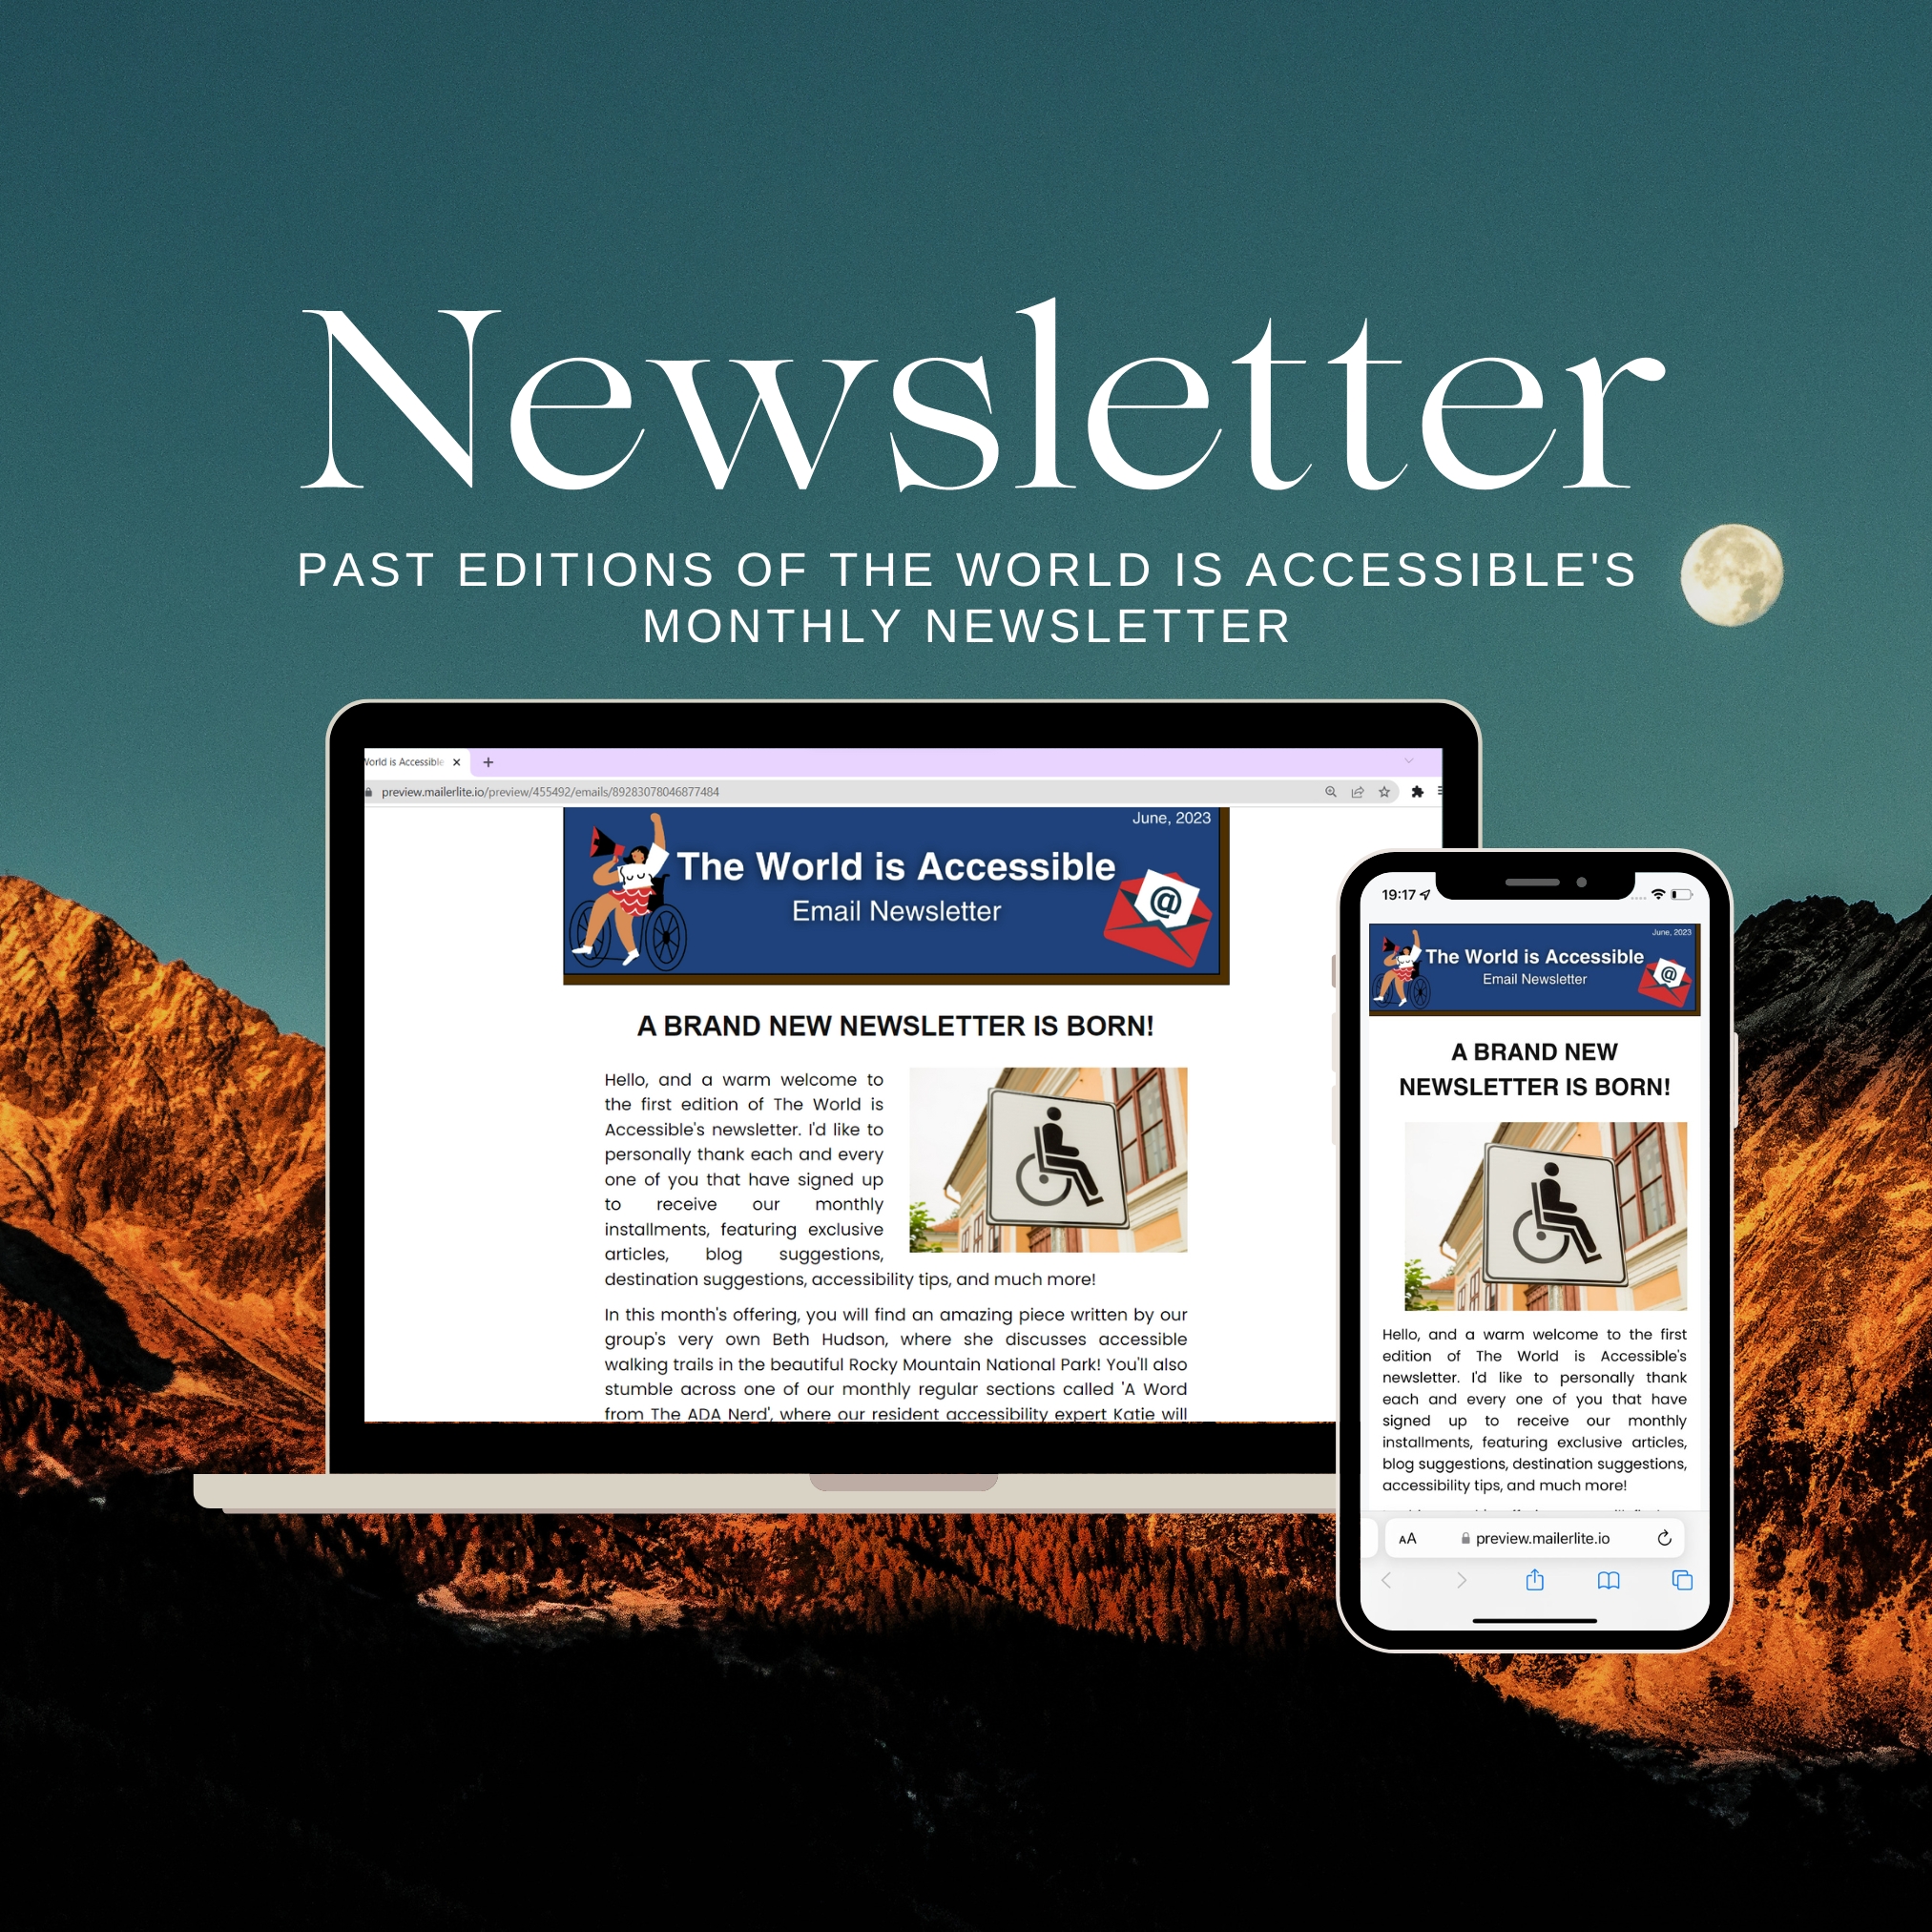 The World is Accessible. There is a laptop and a cell phone, each with a copy of the newsletter on the screen. The background is of the moon in the sky and some mountains. Image text reads: Newsletter, past editions of the world is accessible's monthly newsletter.